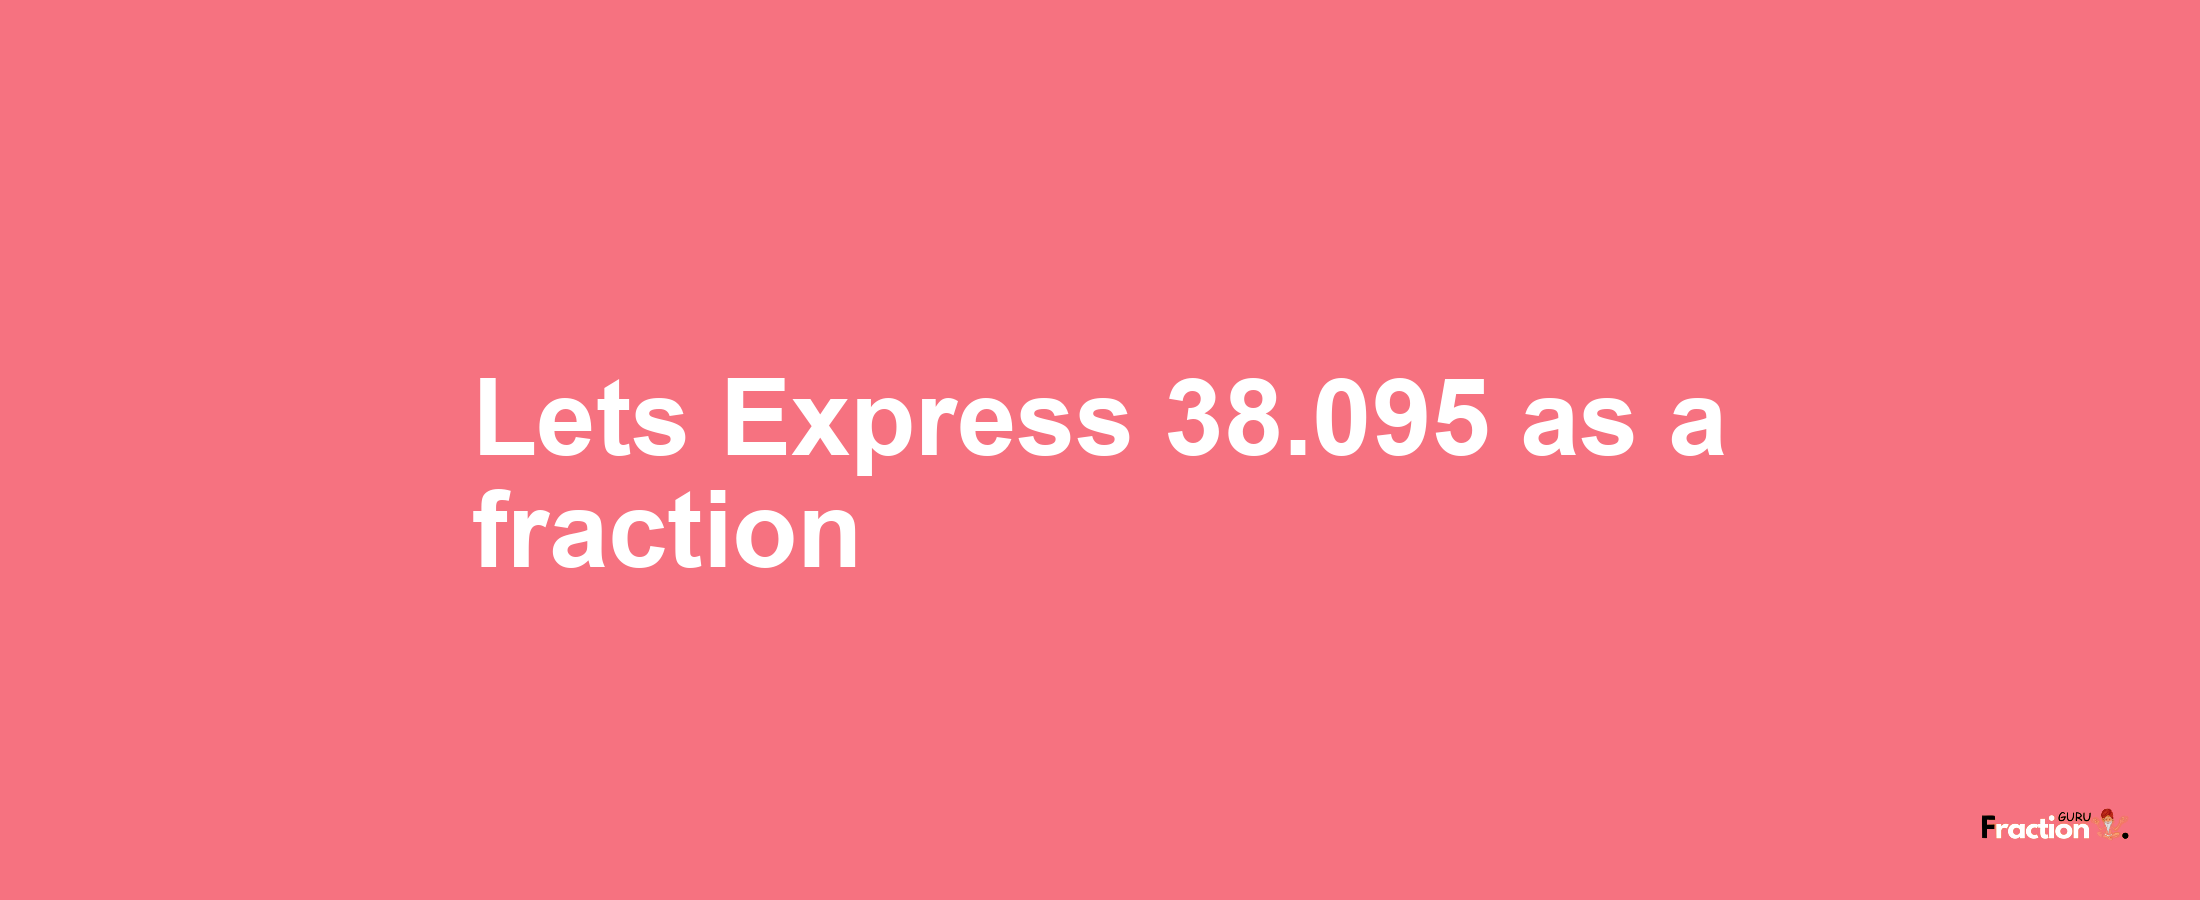 Lets Express 38.095 as afraction